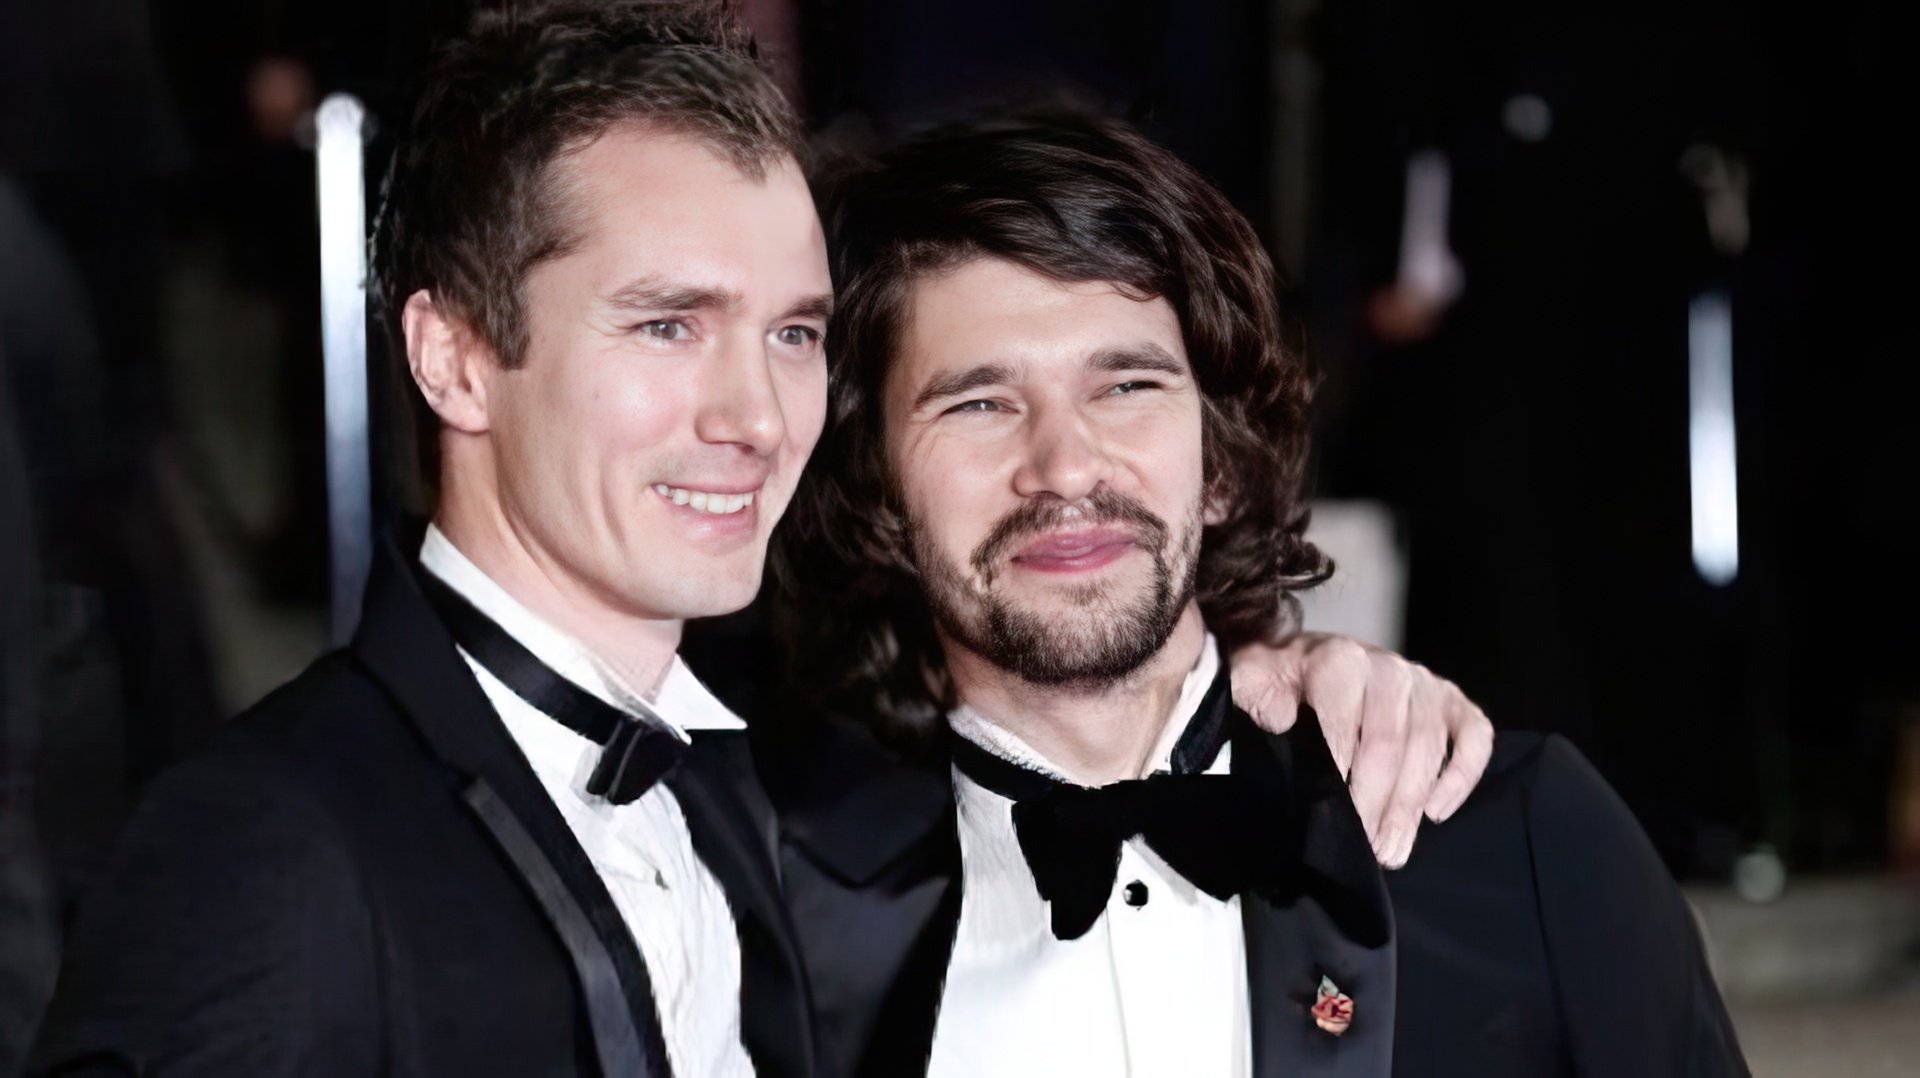 Ben Whishaw has a twin brother, but they don’t look alike